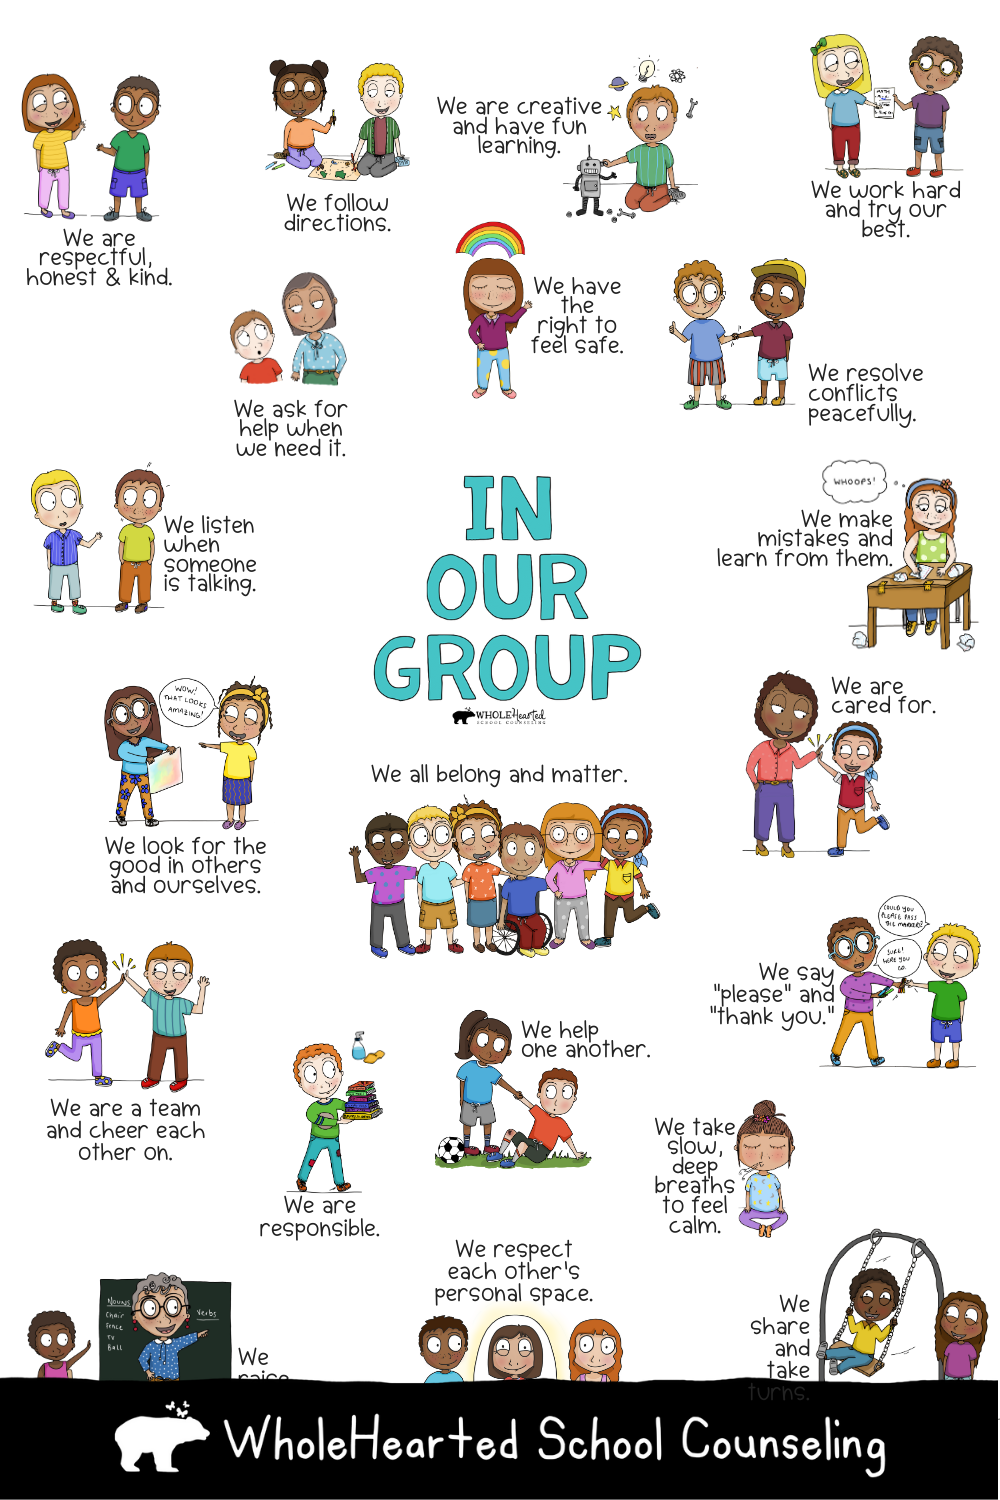 List of school counseling small group rules with illustrations of school aged kids.